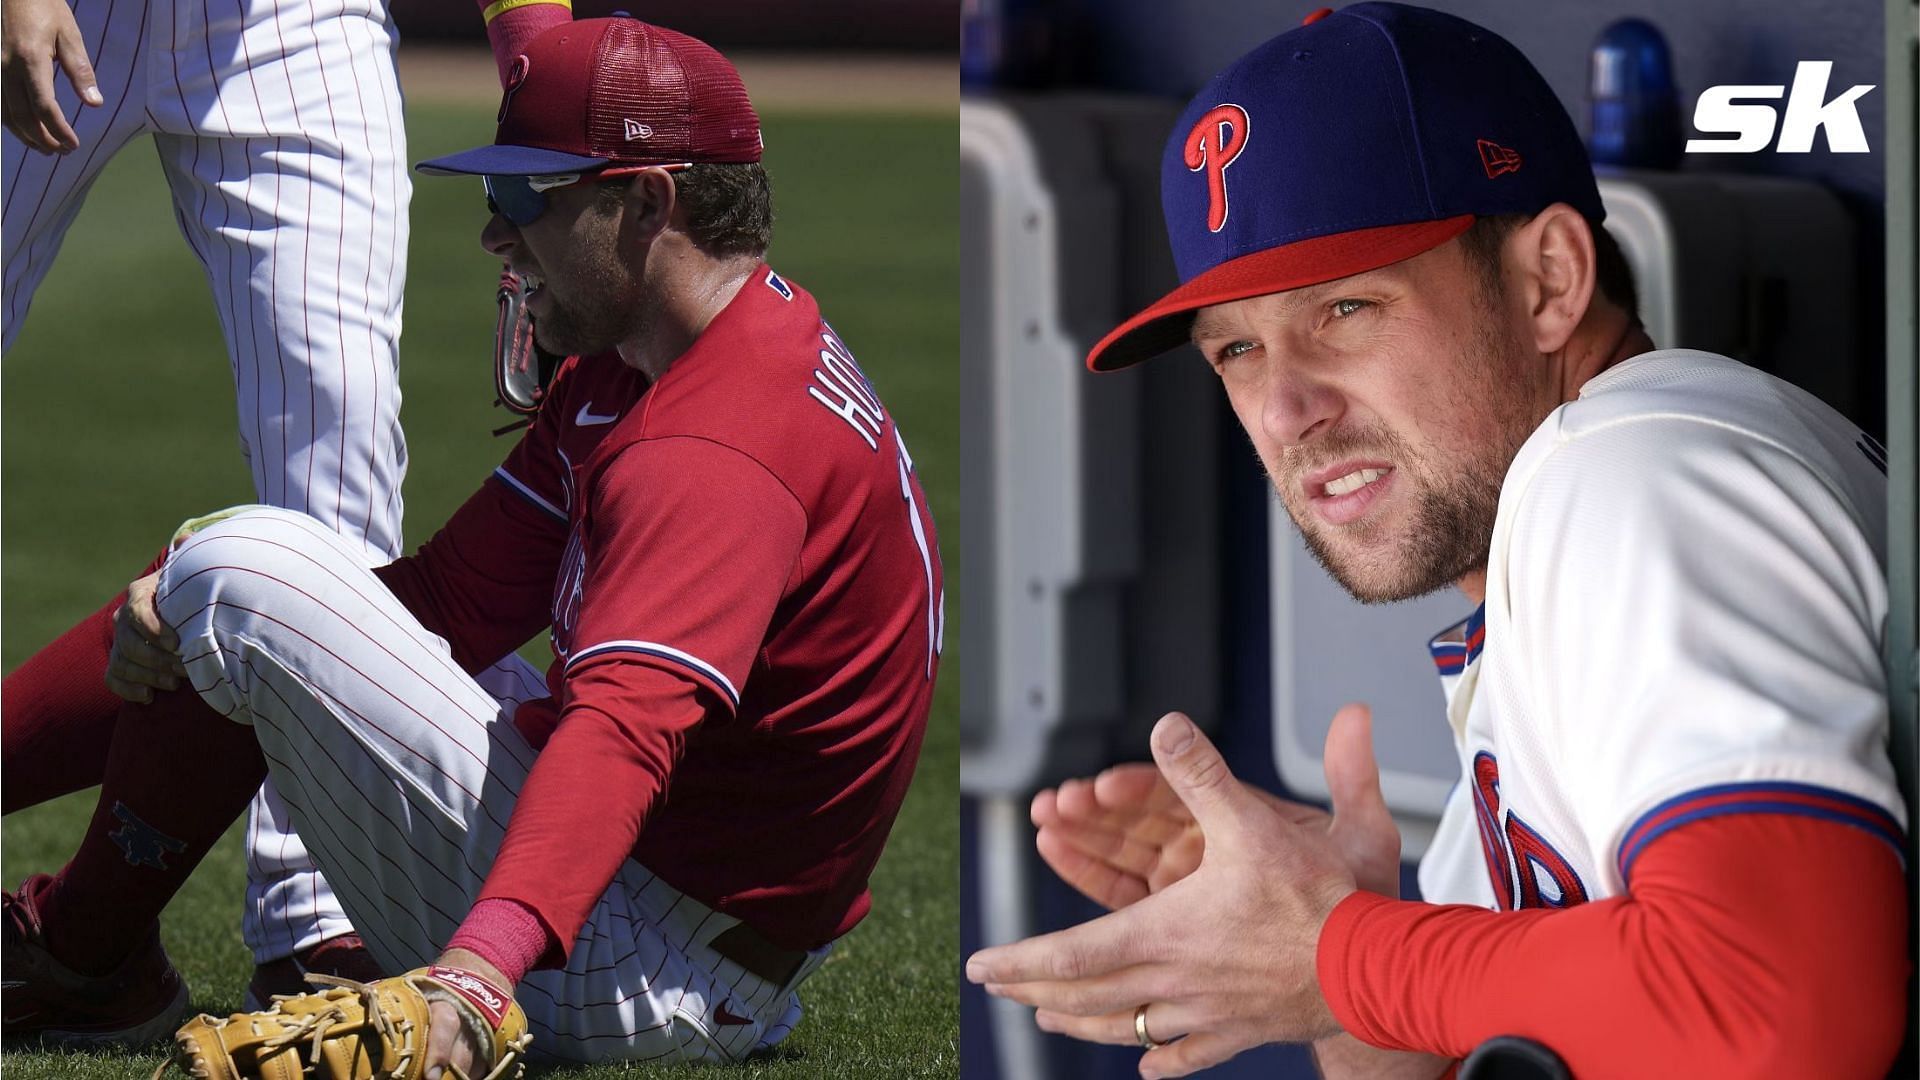 Phillies manager Rob Thomson has not ruled out a Rhys Hoskins return before the end of the postseason